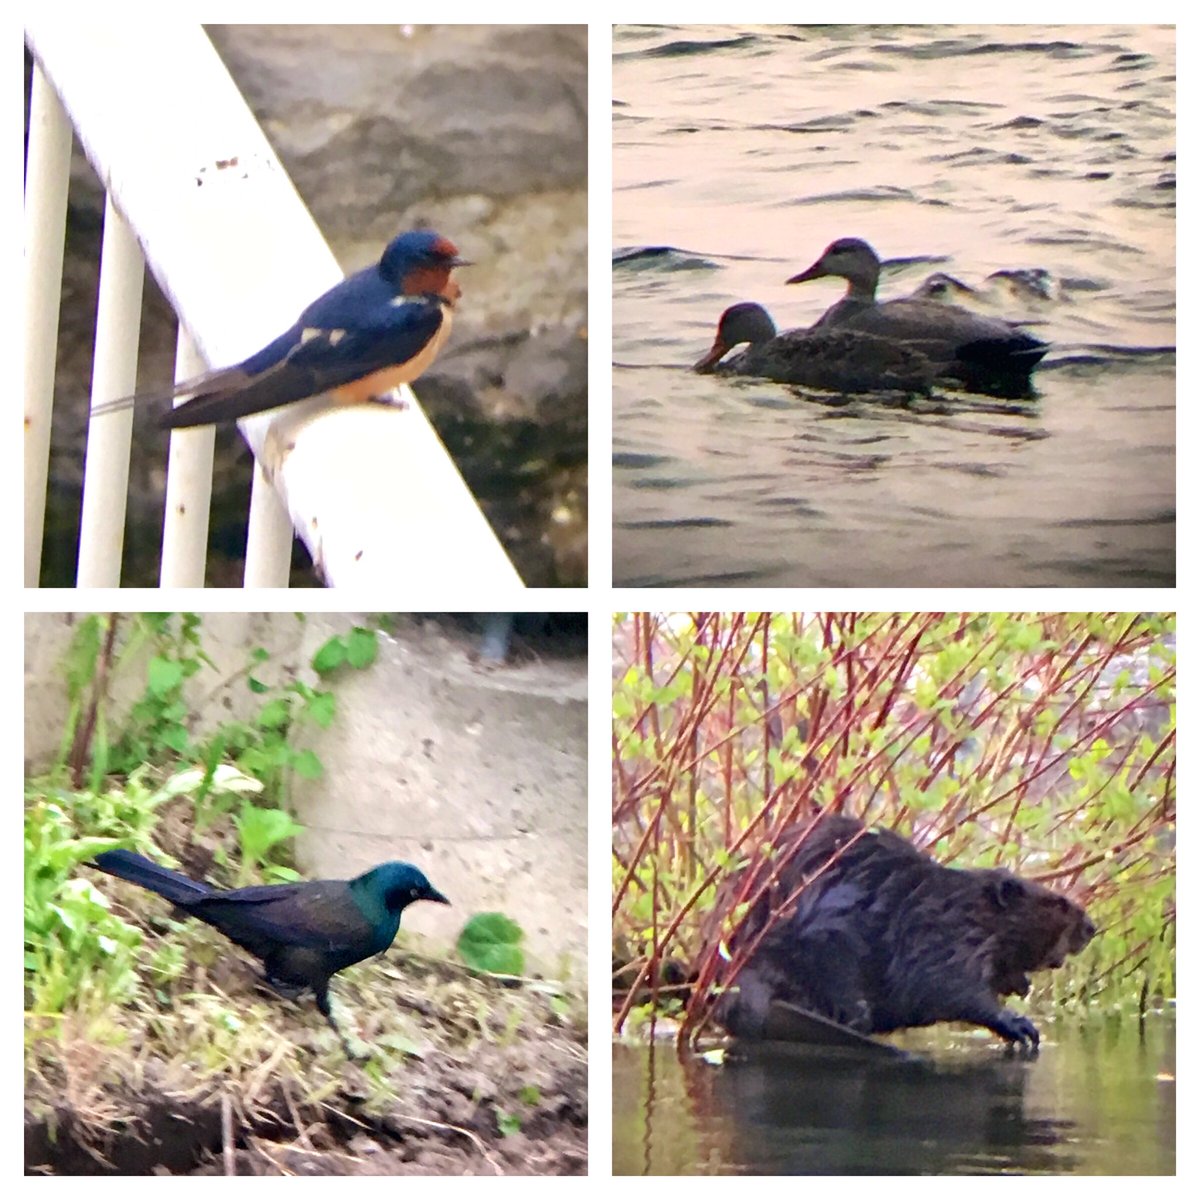 Ontario Place bird (& wildlife) notes #5 | New sights this evening - two Gadwall ducks among a group of cormorants, ring-billed gulls, and a mute swan. And a beaver!